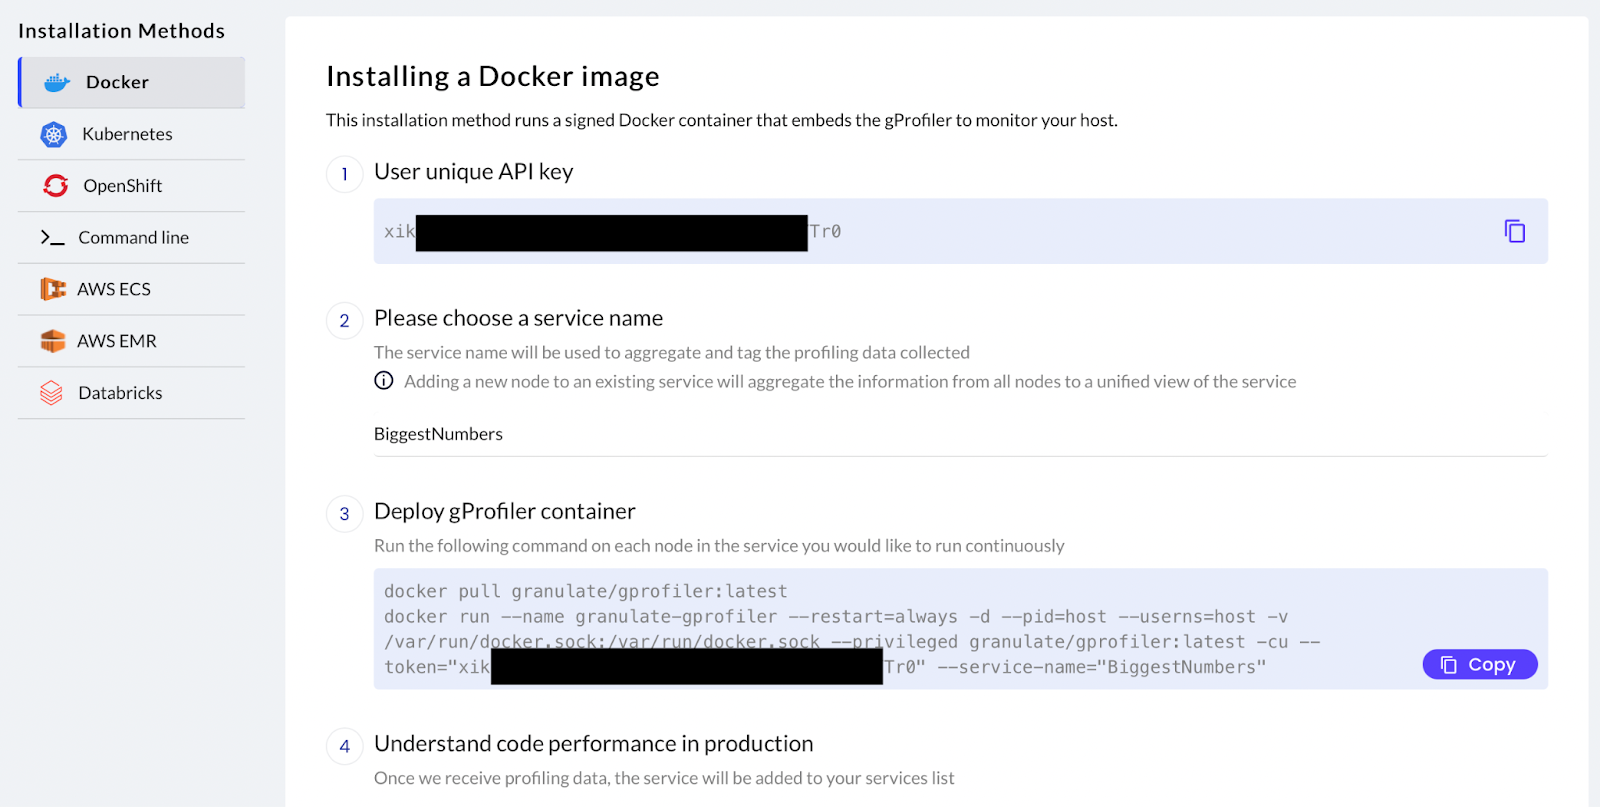 Figure 2: Instructions on how to integrate gProfiler into a Docker environment